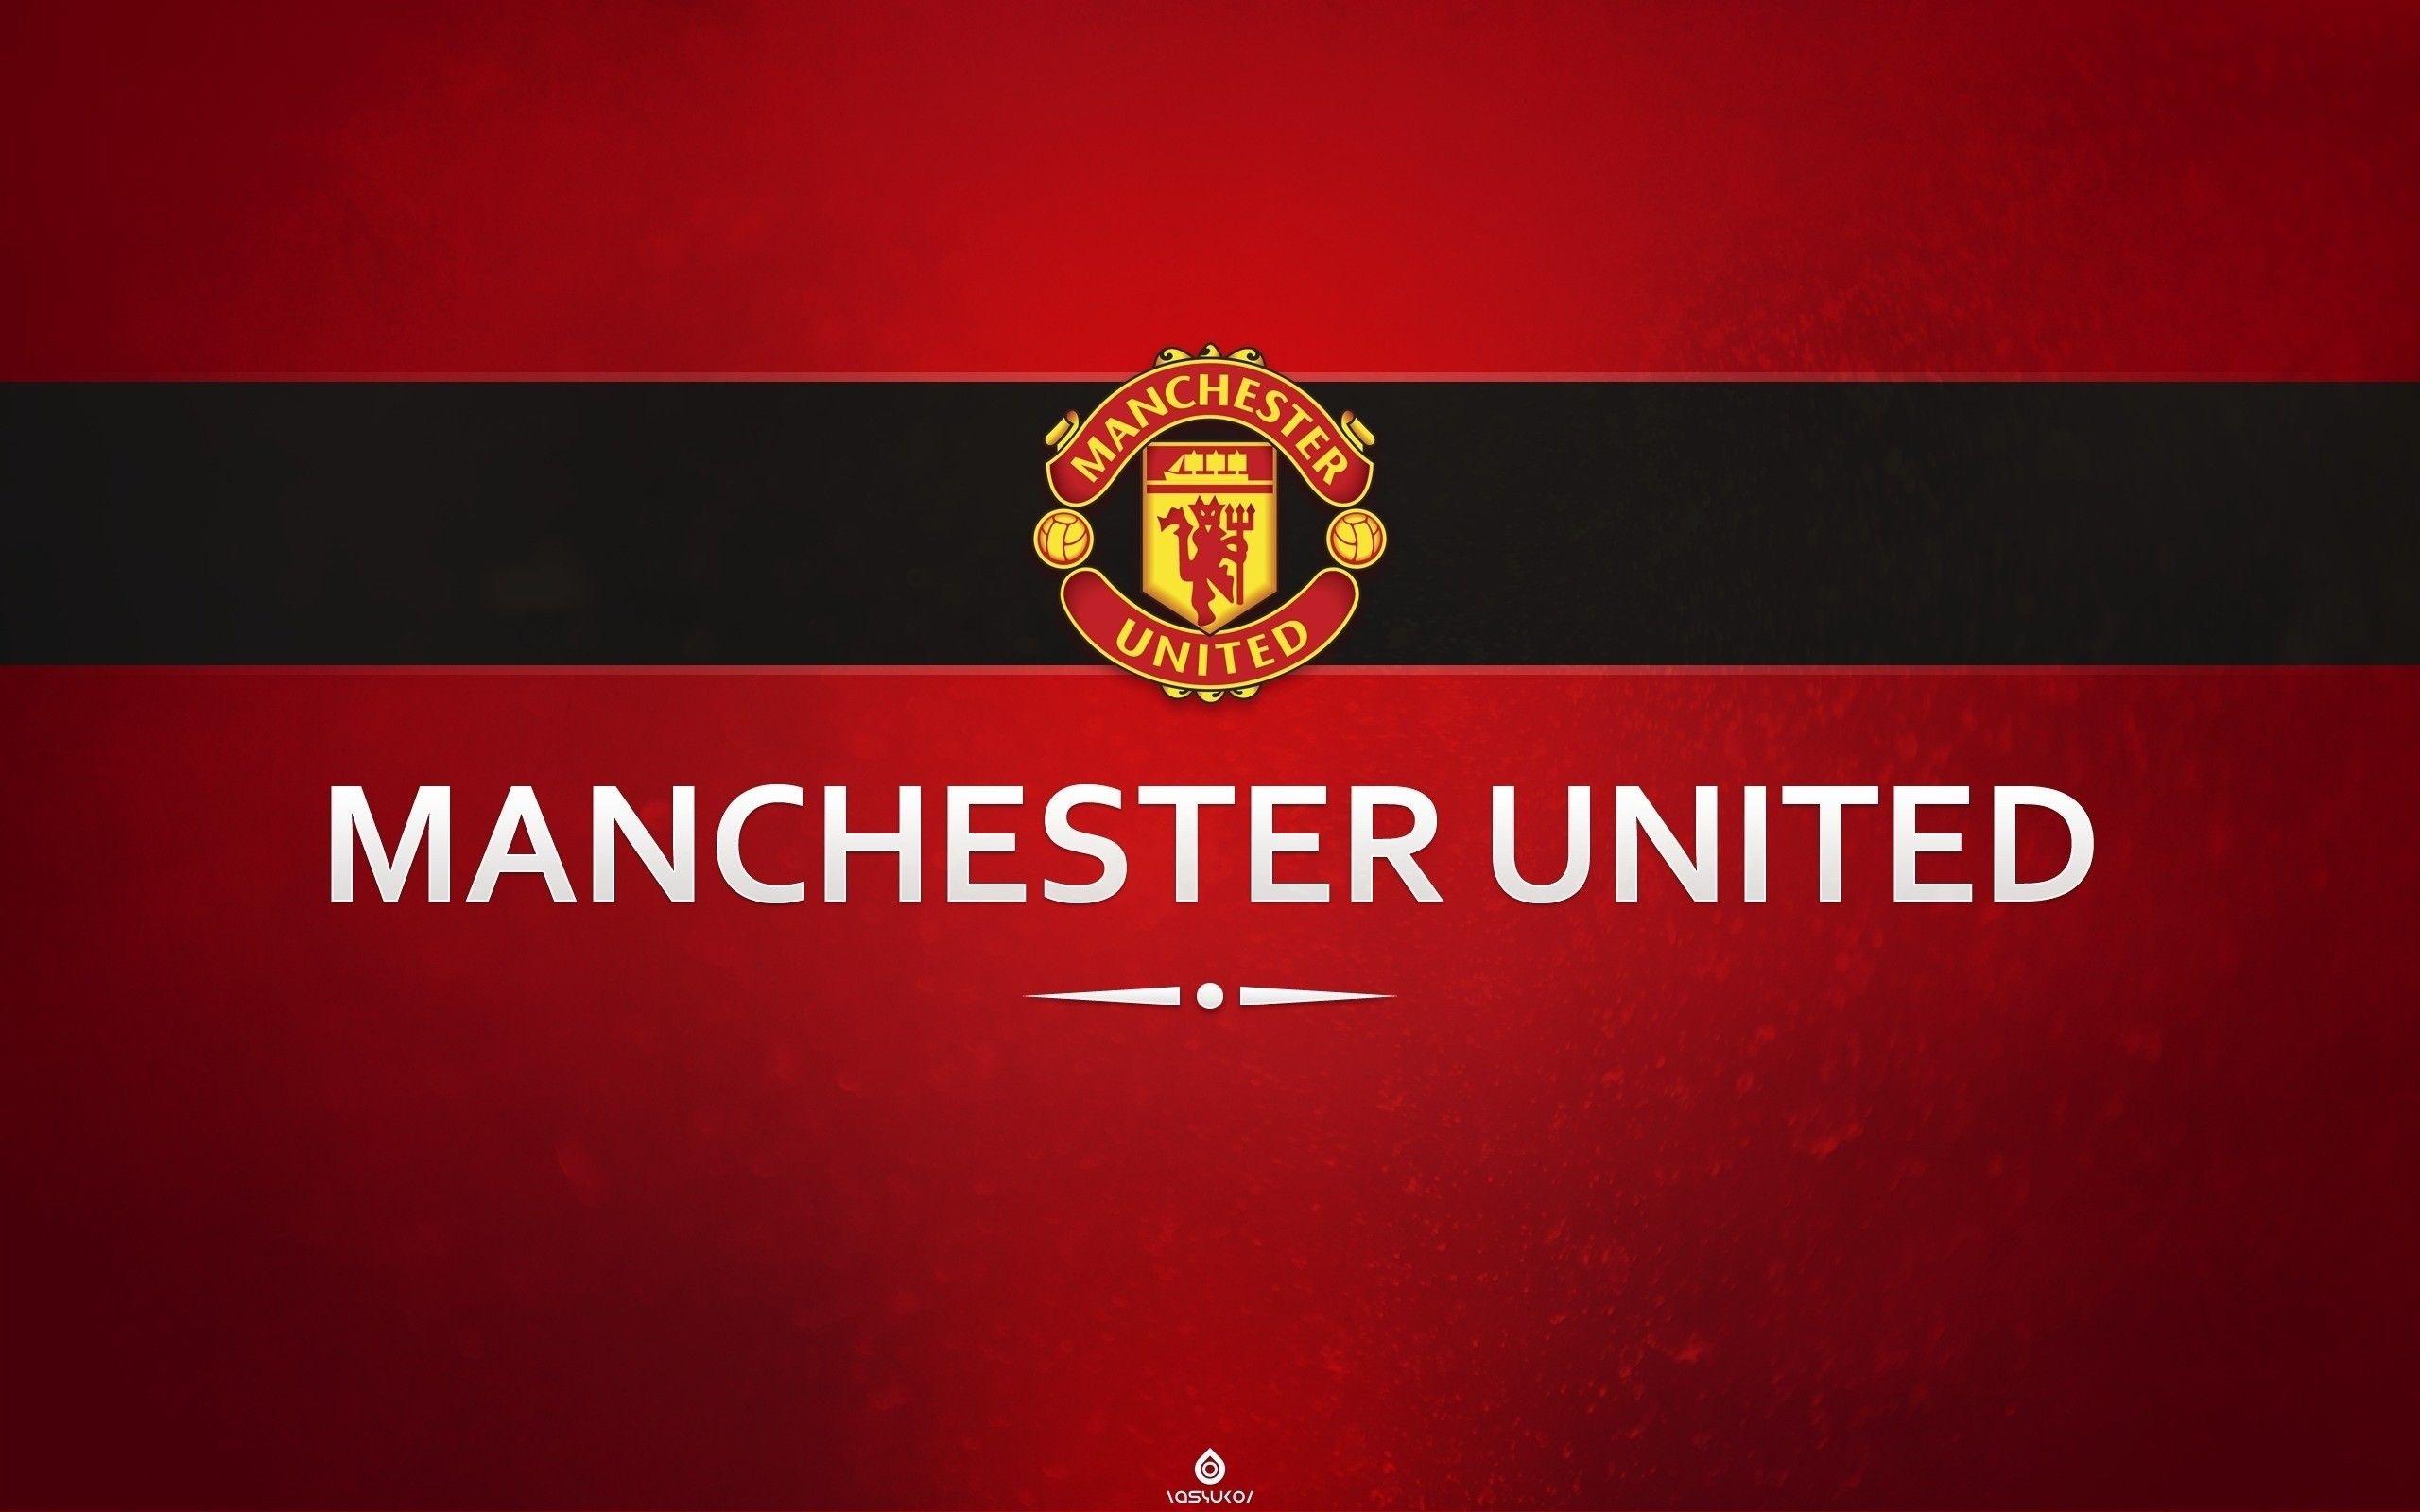 sports, Manchester United FC, Red Devils, football teams, club